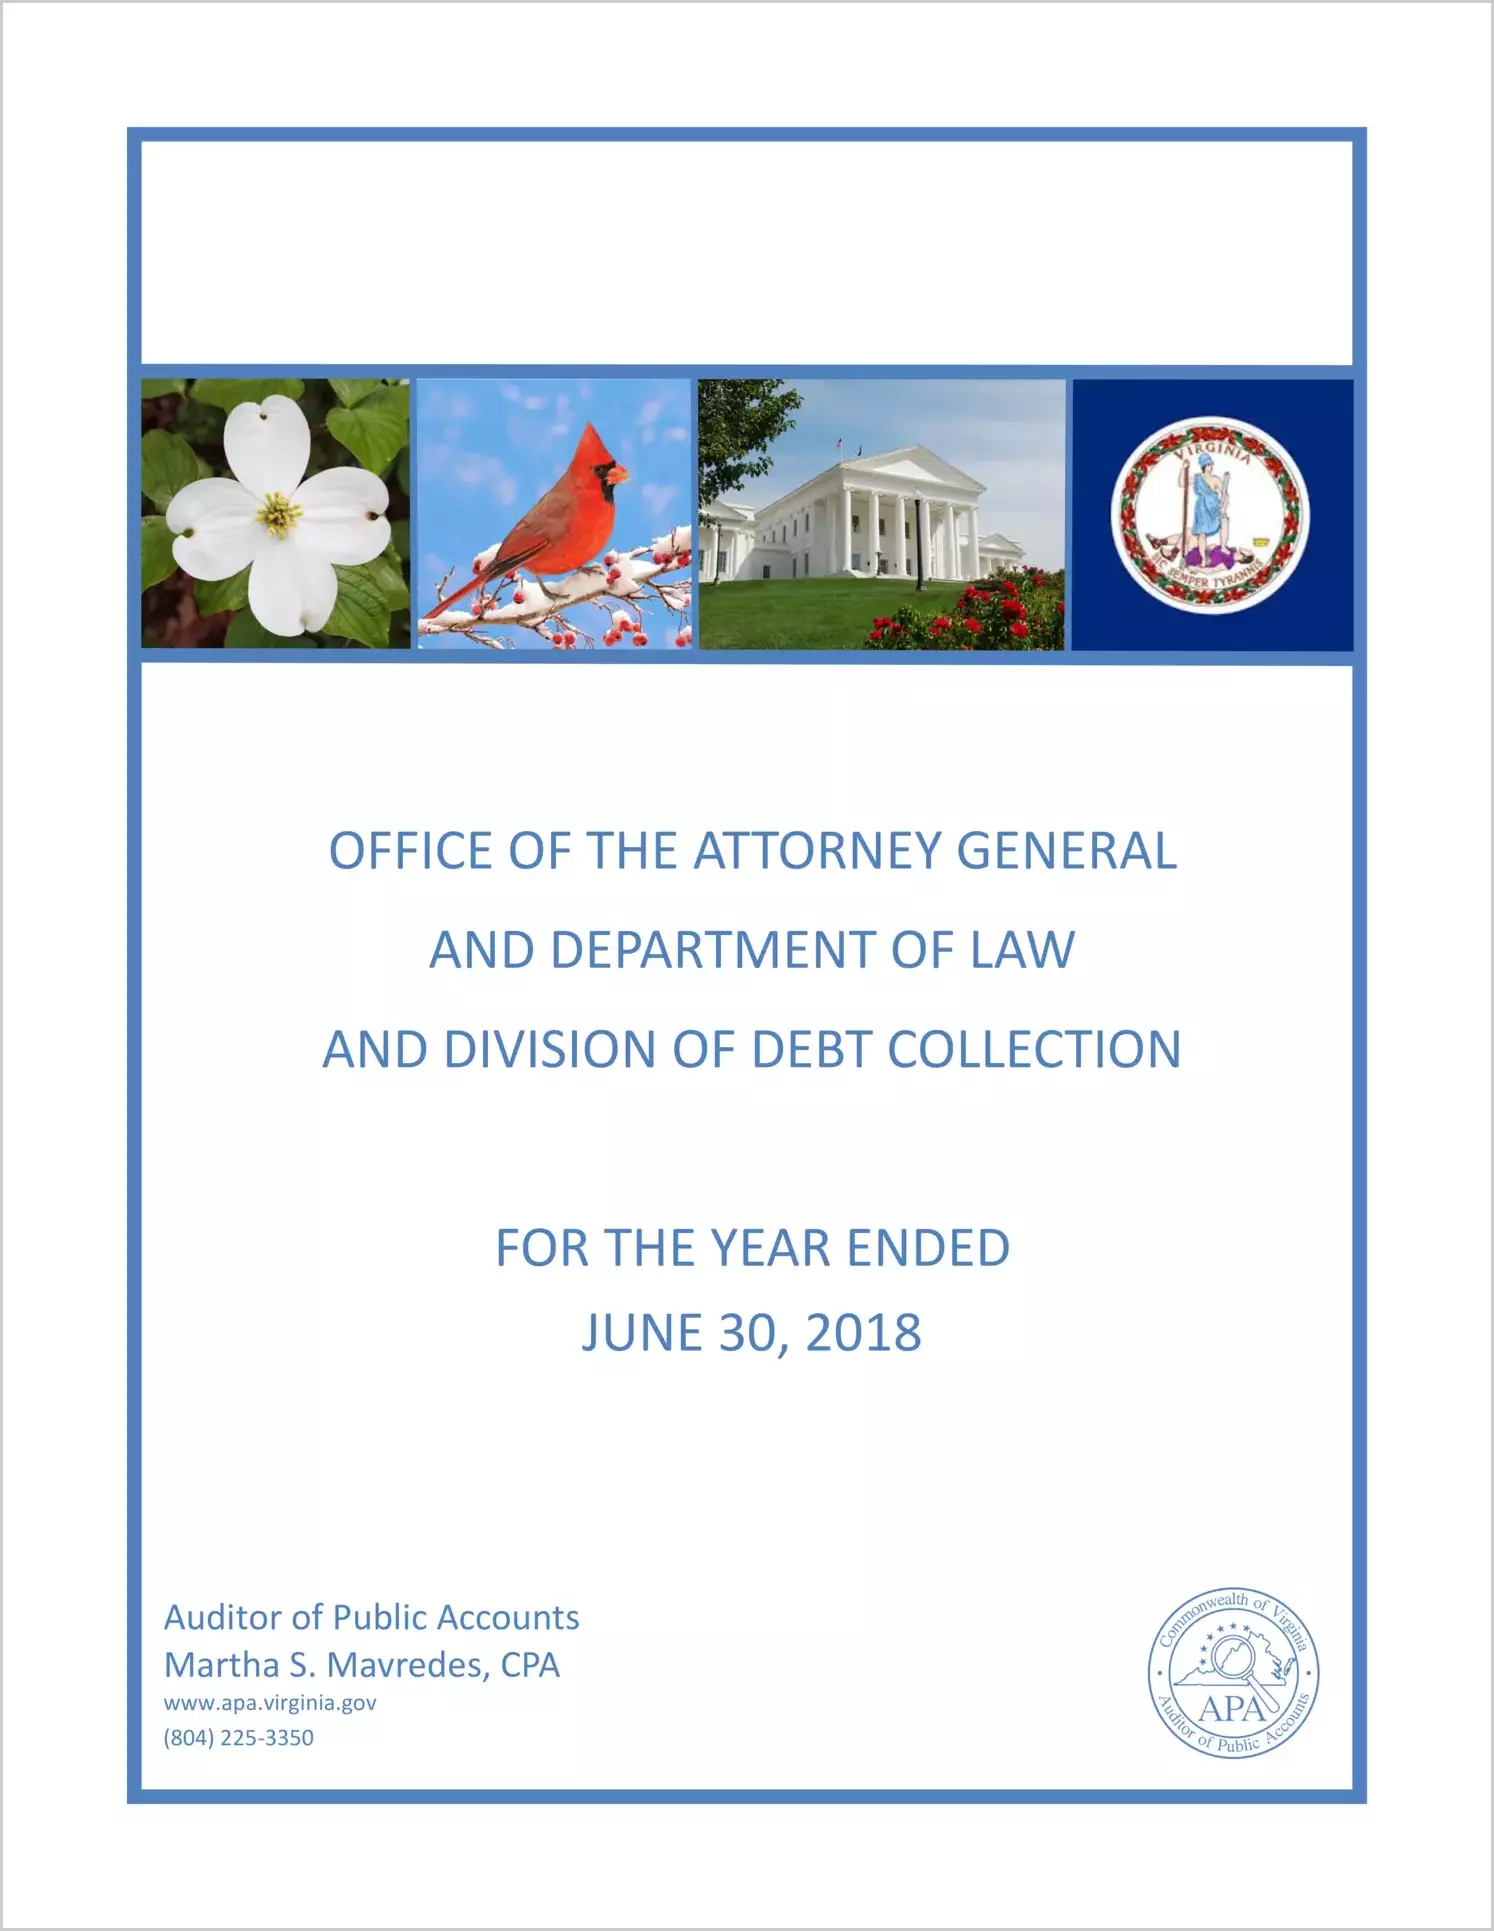 Office of the Attorney General and Department of Law and Division of Debt Collection for the year ended June 30, 2018